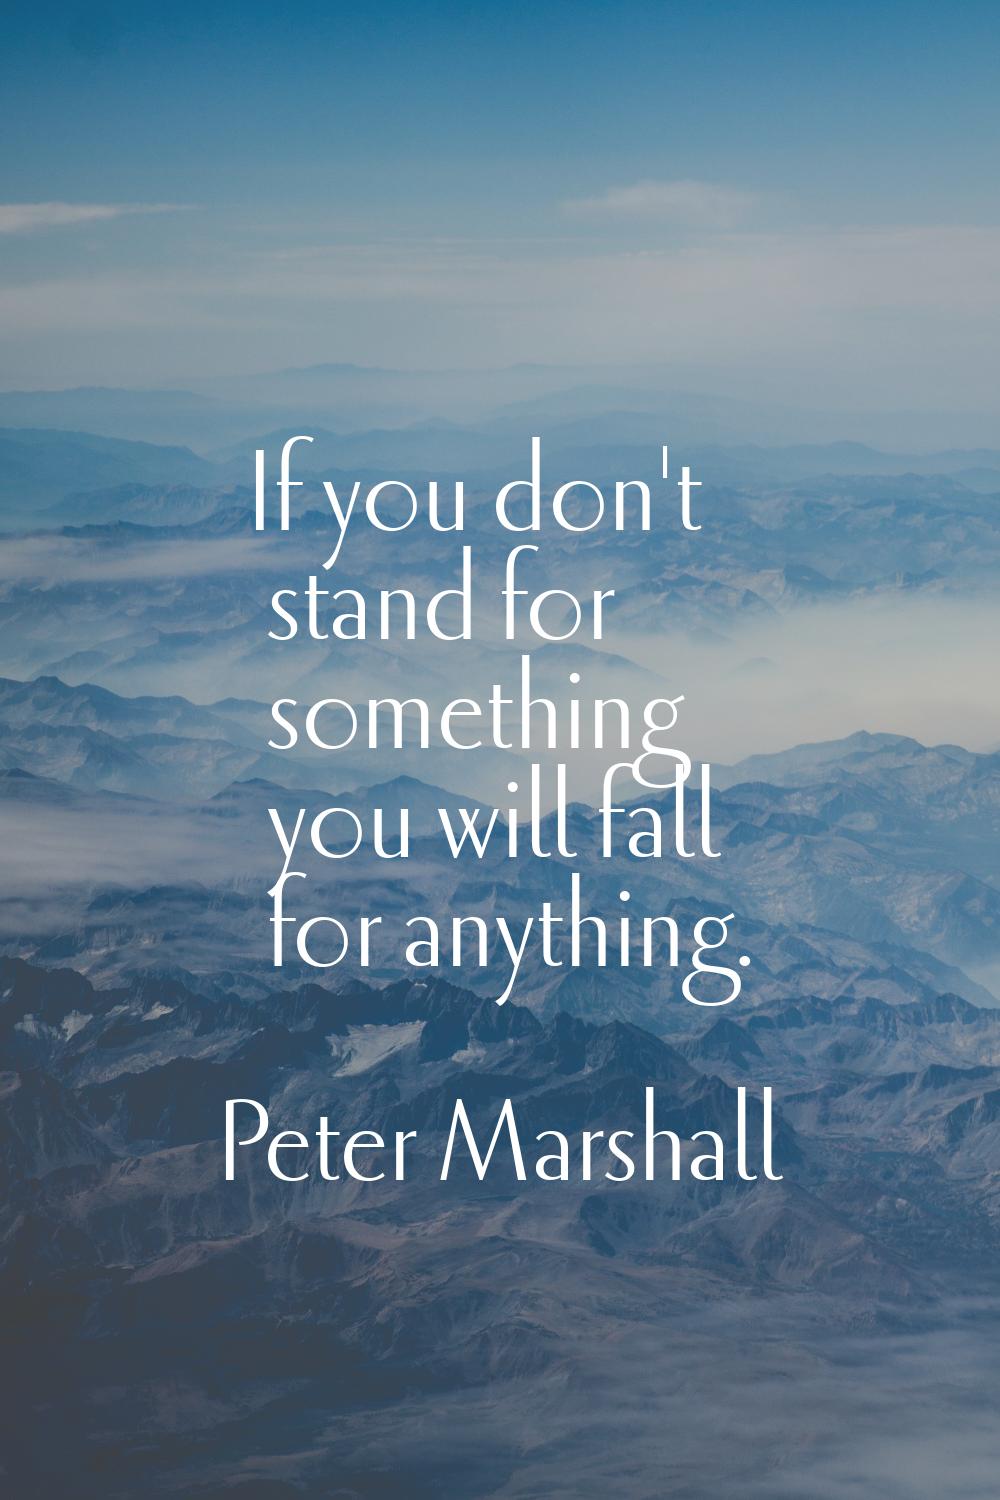 If you don't stand for something you will fall for anything.